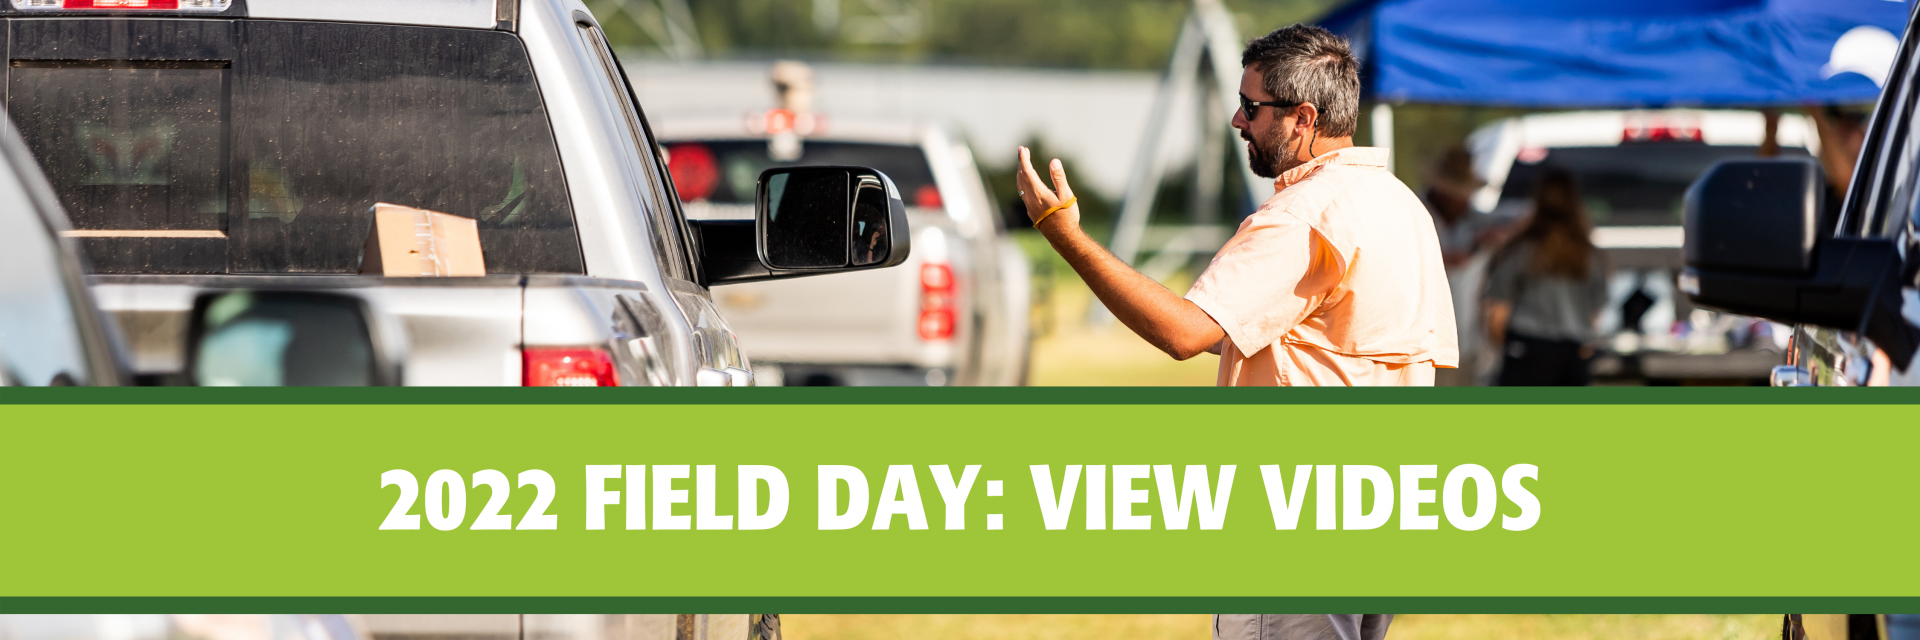 View Field Day Videos 2022 Sunbelt Ag Expo